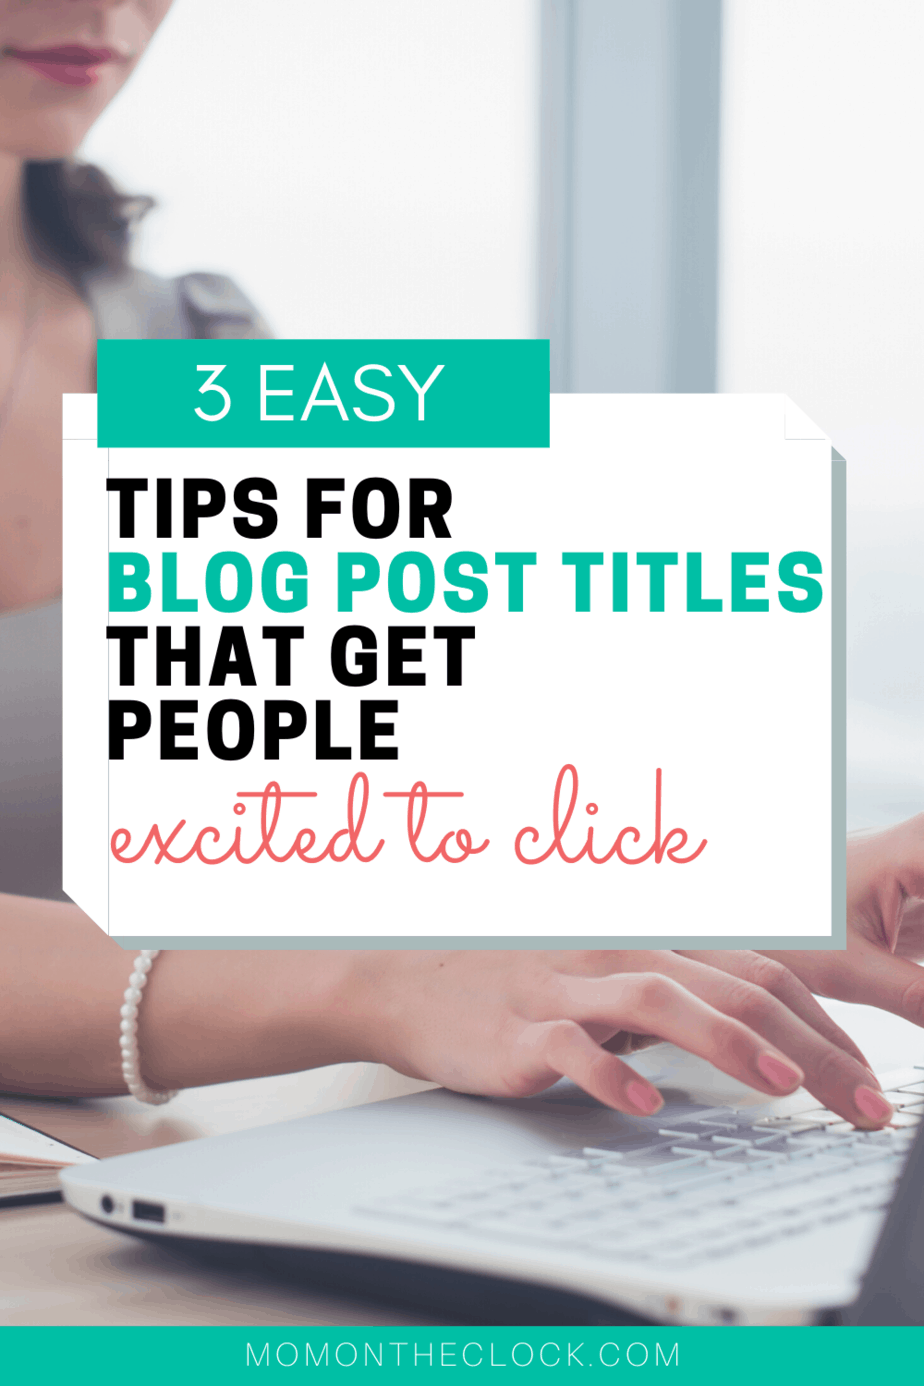 3 Easy Tips for Blog Post Titles That Get People Excited to Click